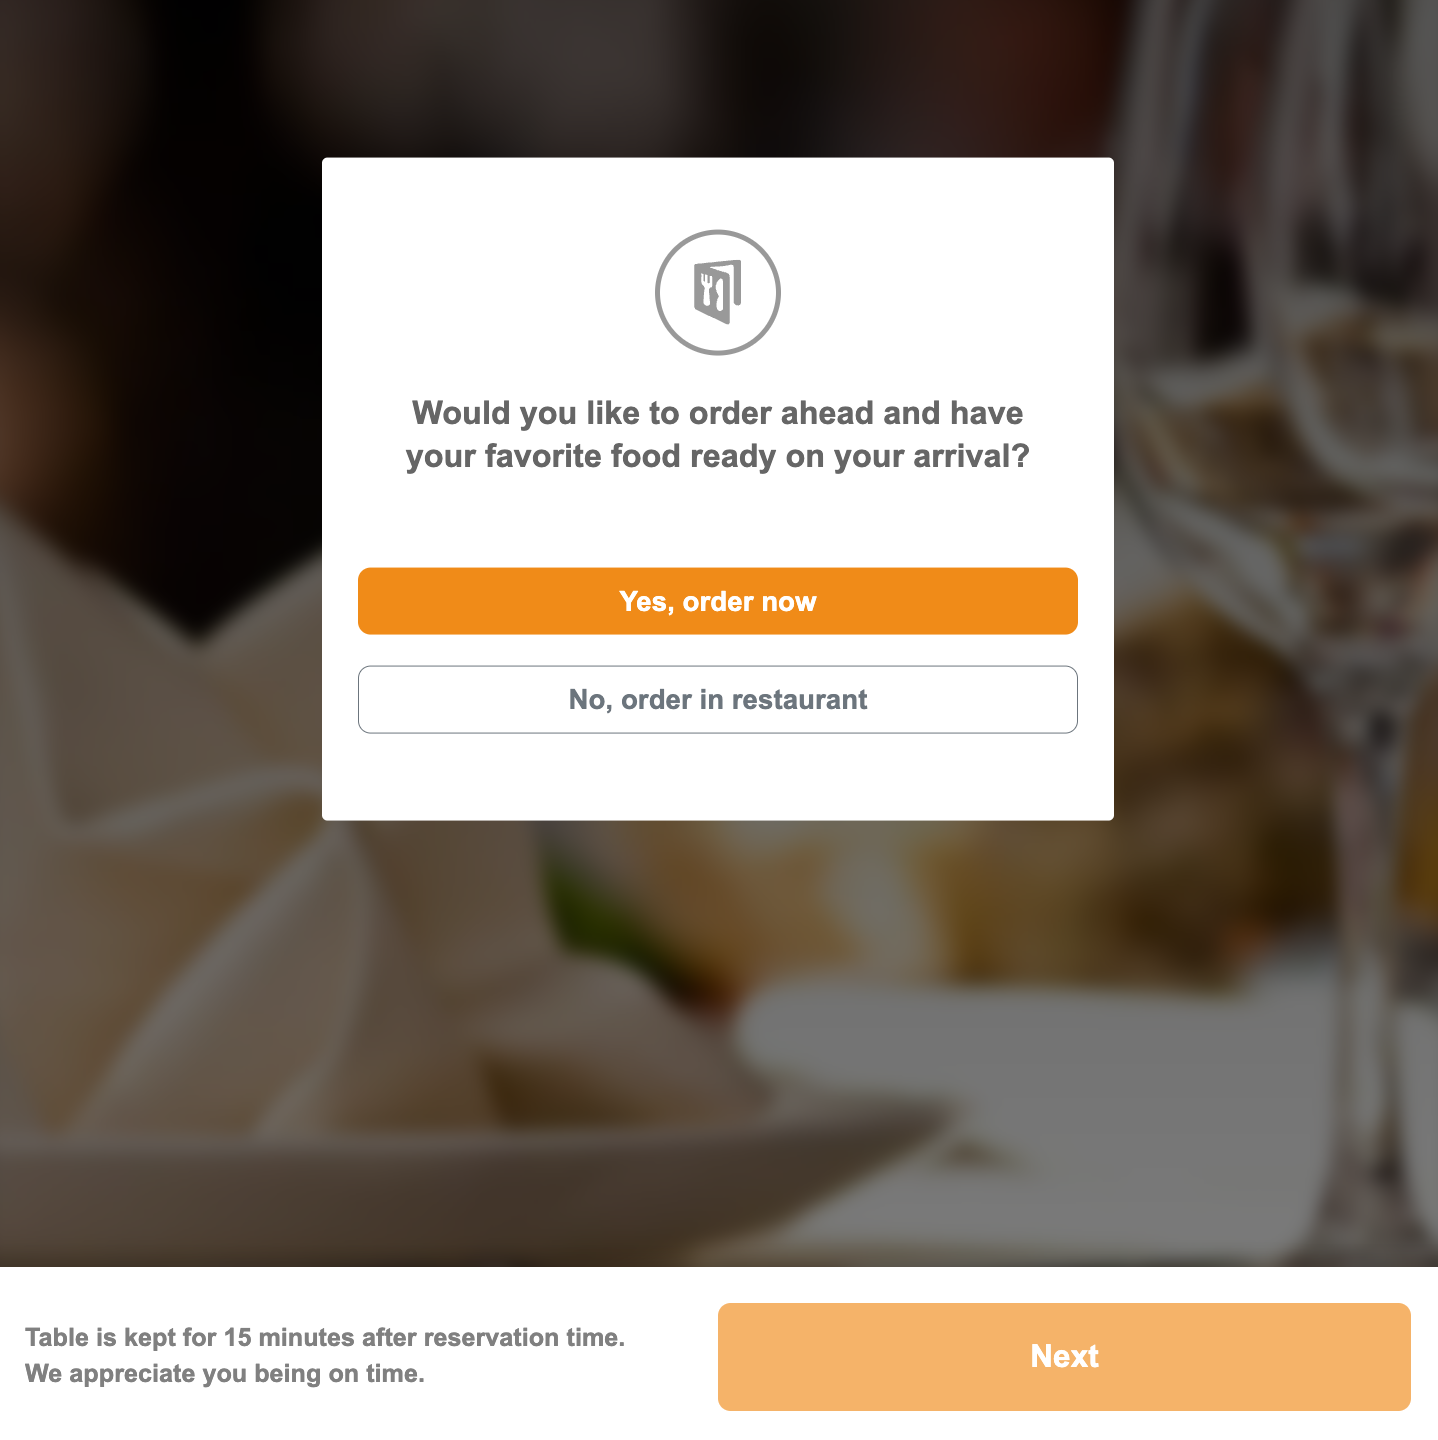 how to manage customer waiting time in restaurants: enable food pre-orders for table reservations